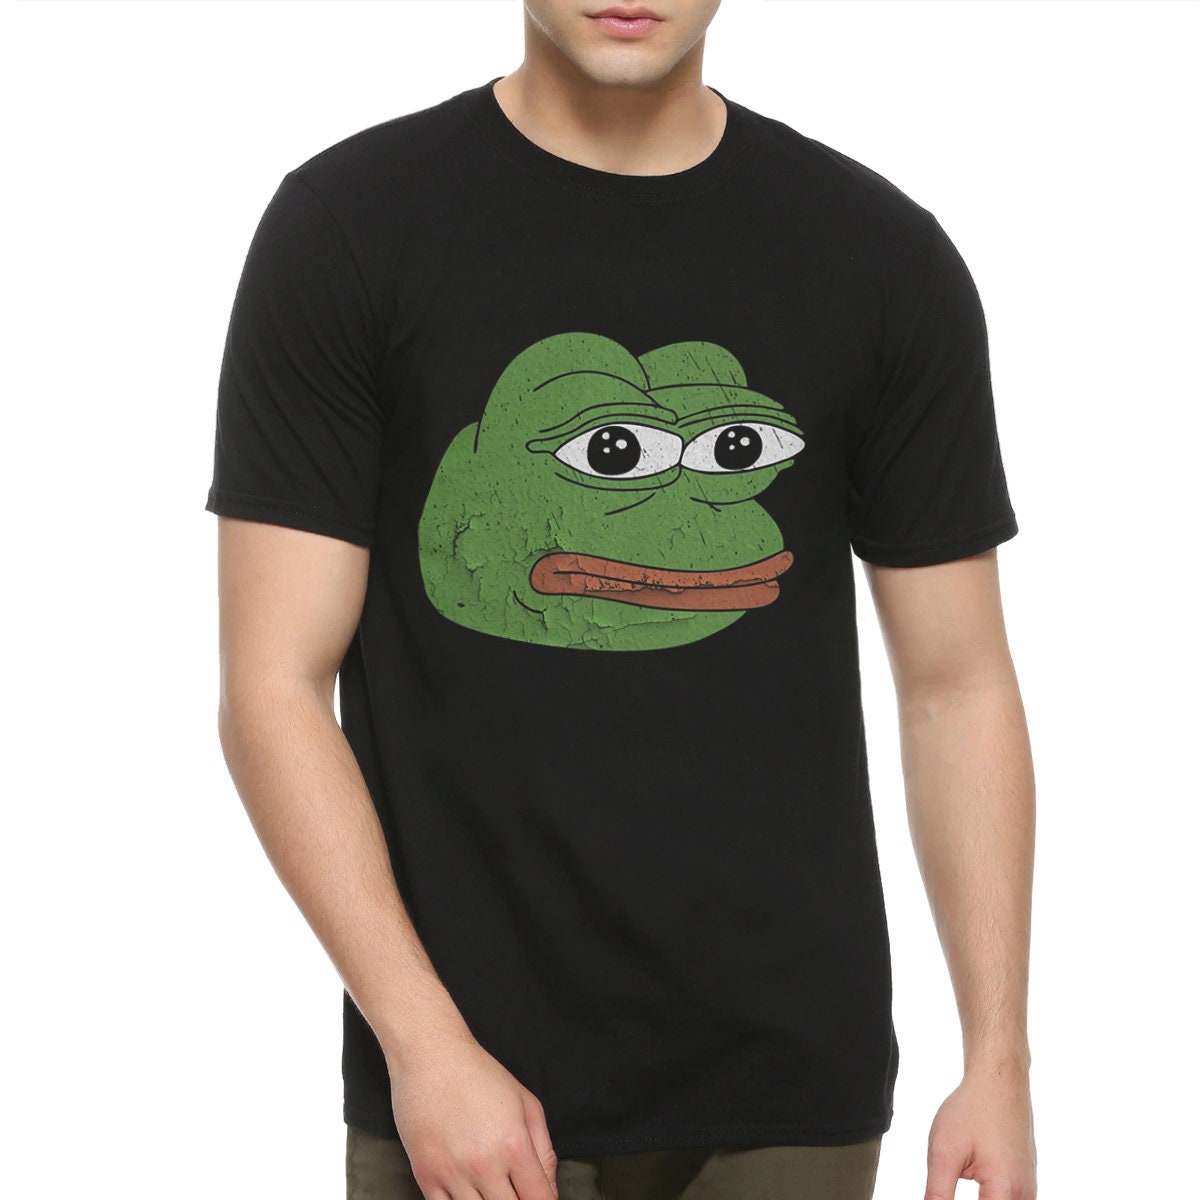 Pepe the Frog T-shirt and Women's Sizes - Etsy